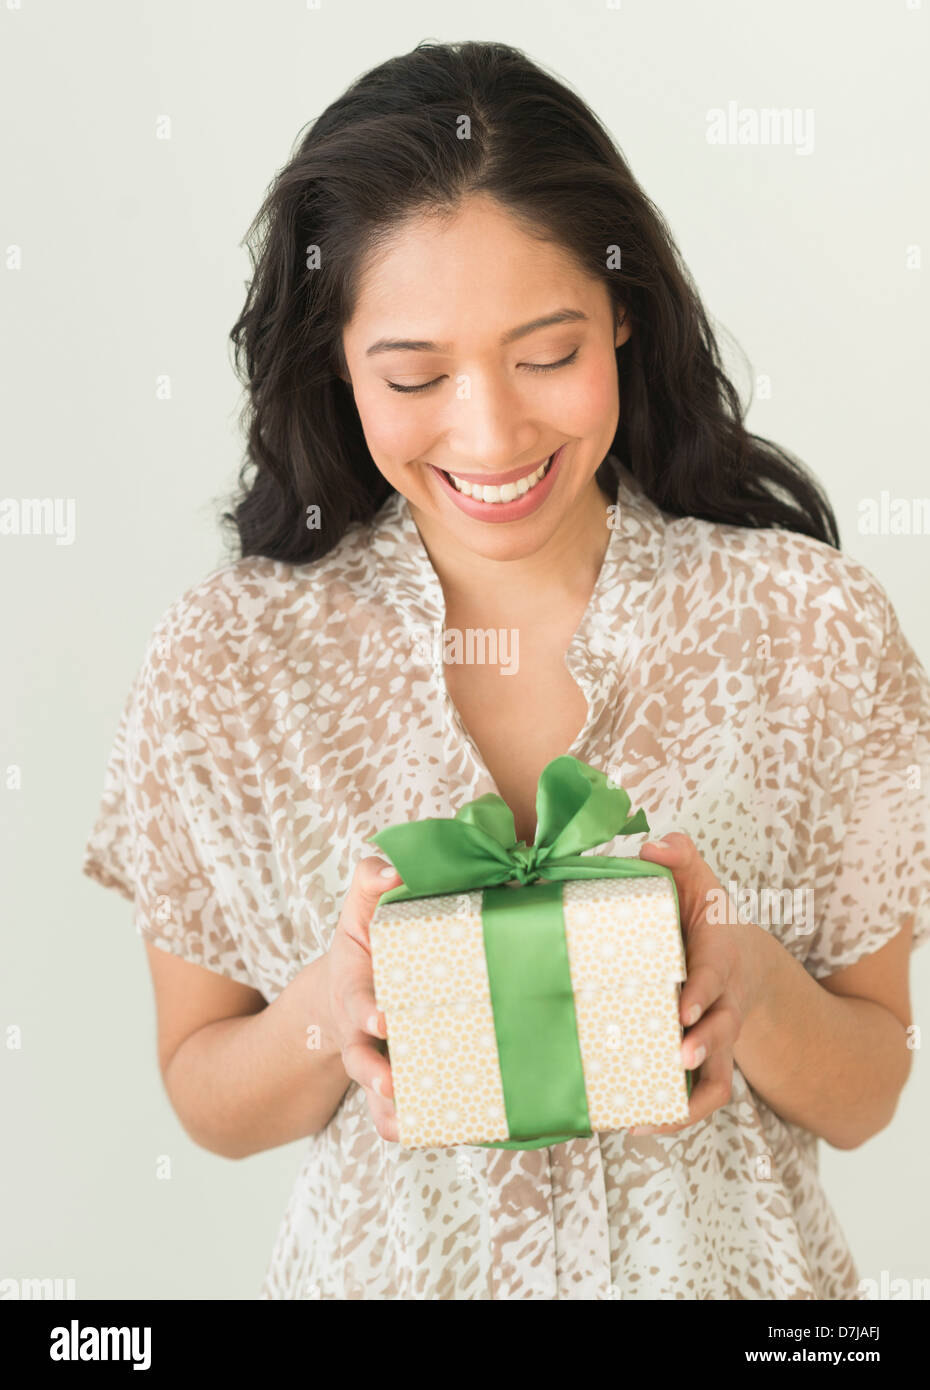 Young woman holding present Banque D'Images